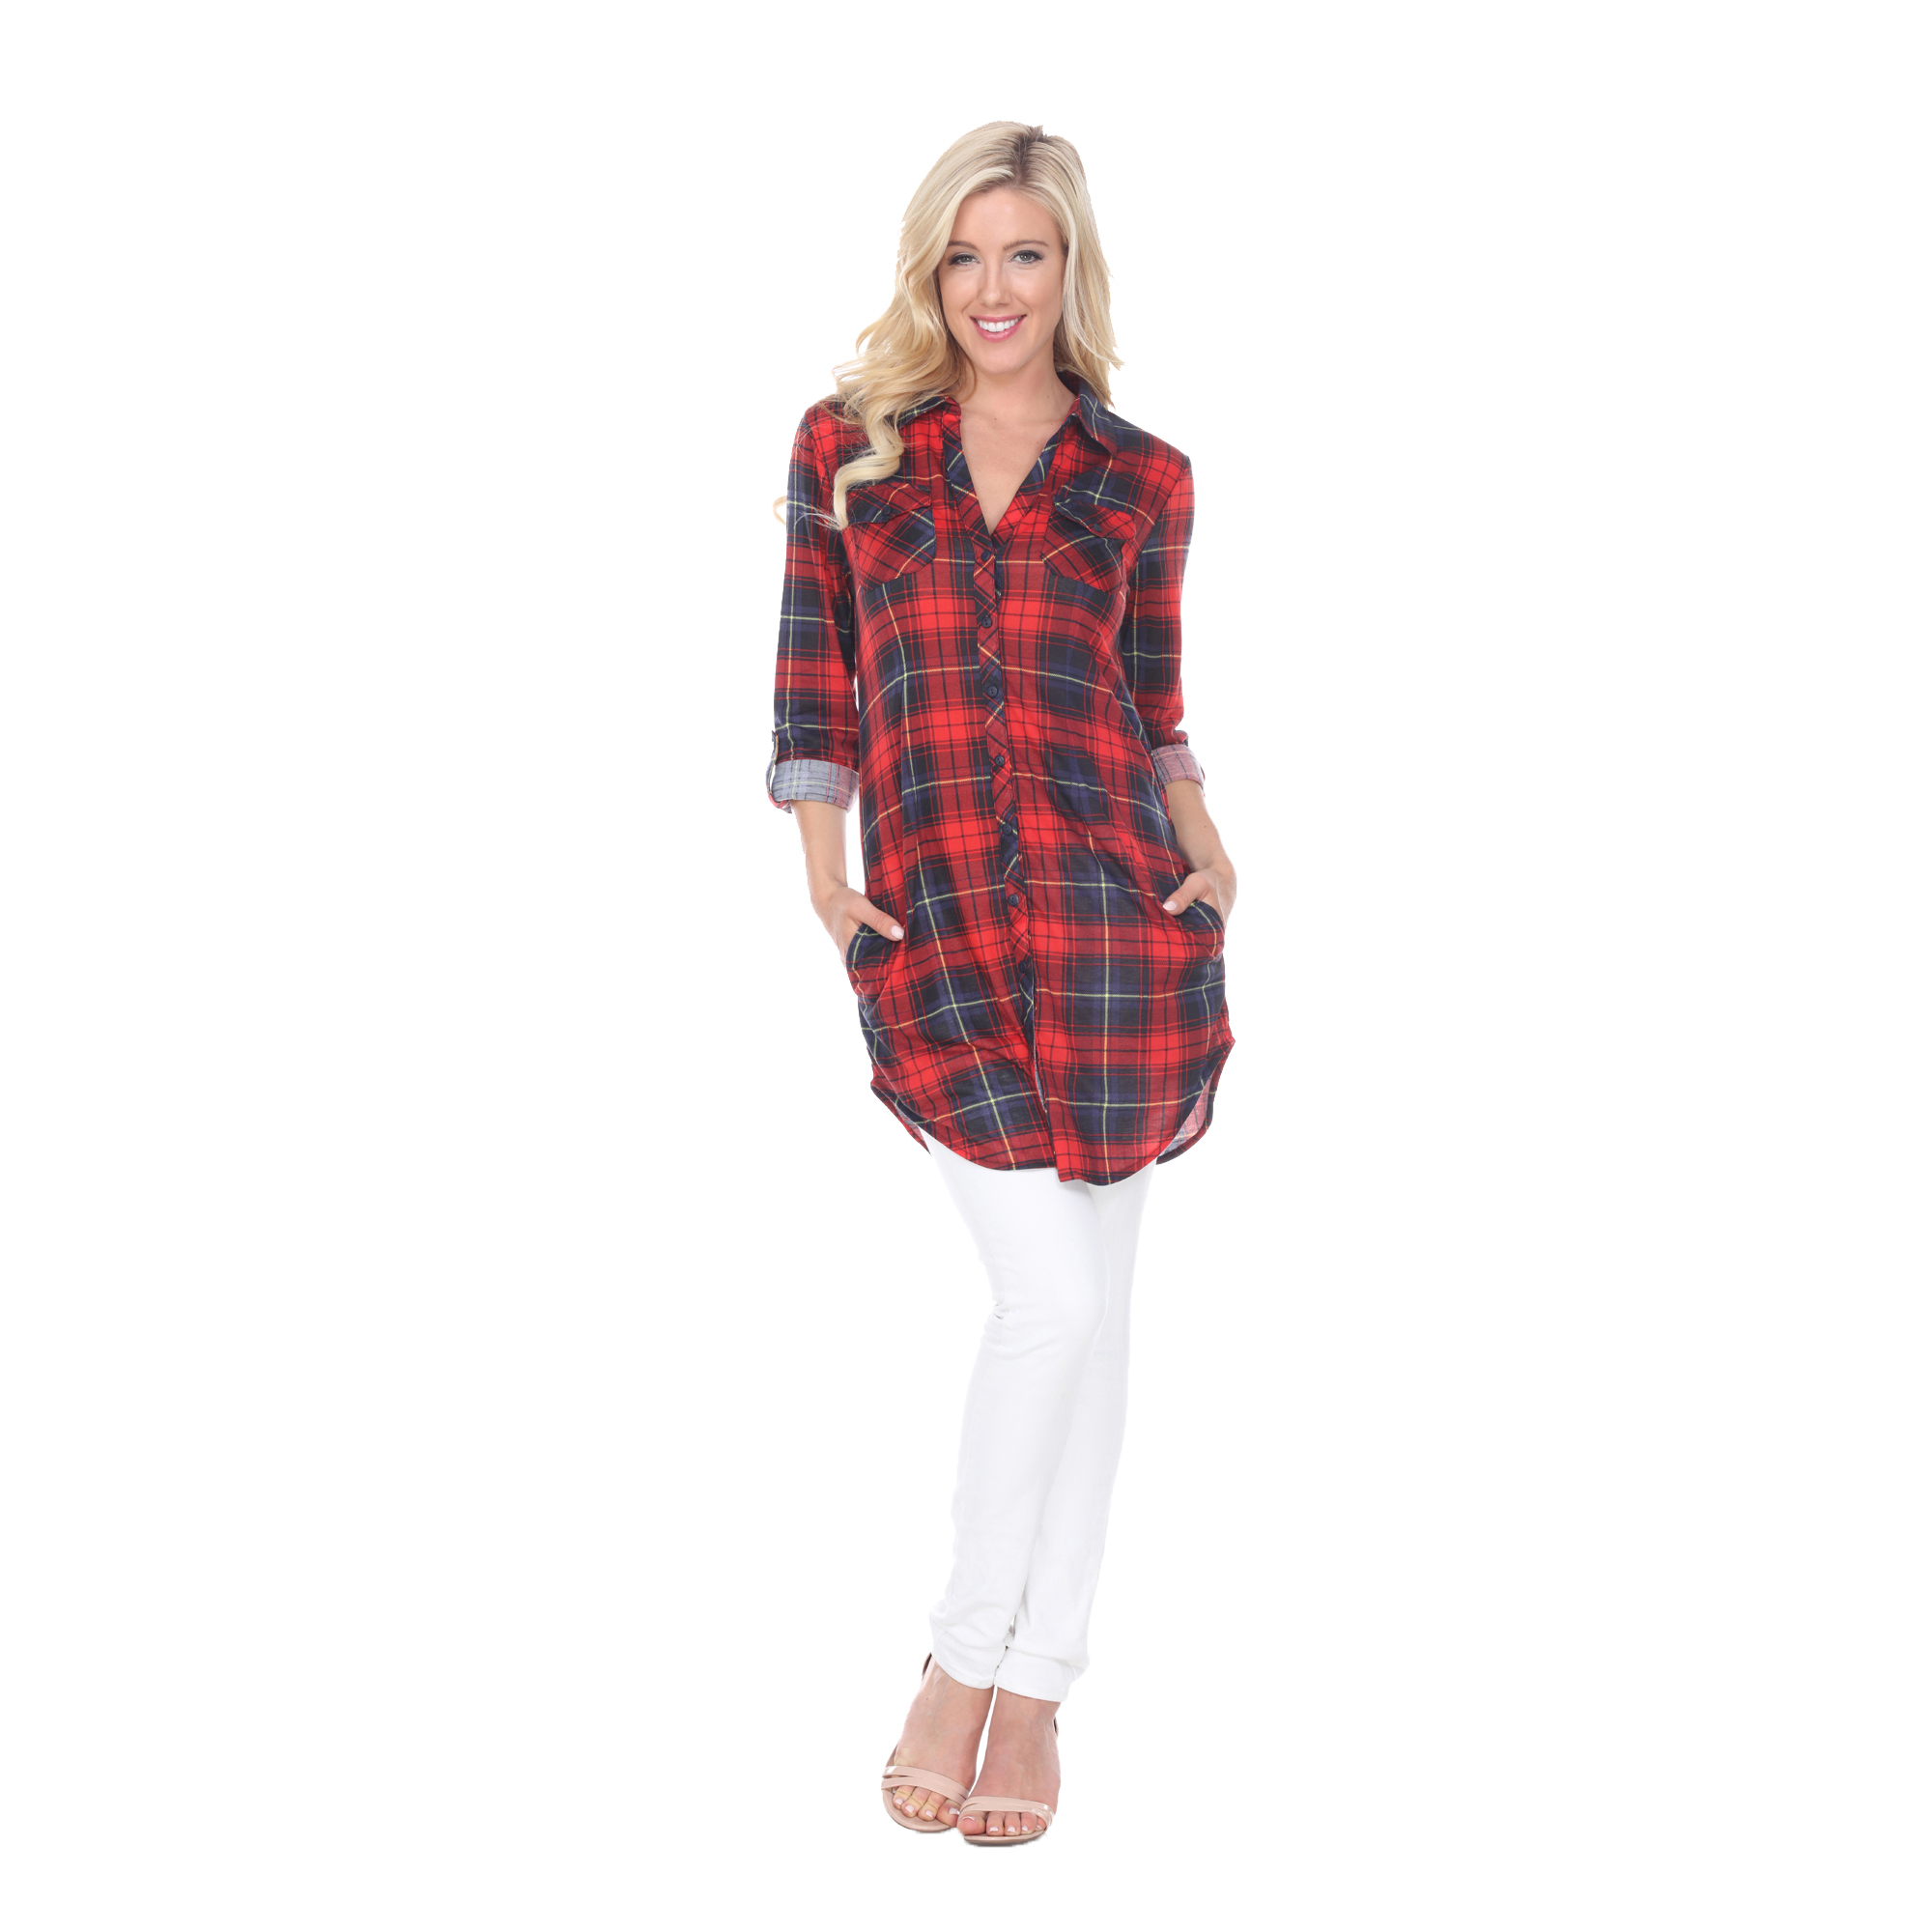 White Mark Women's Stretchy Plaid Flannel Tunic Top - Red/Black, Large